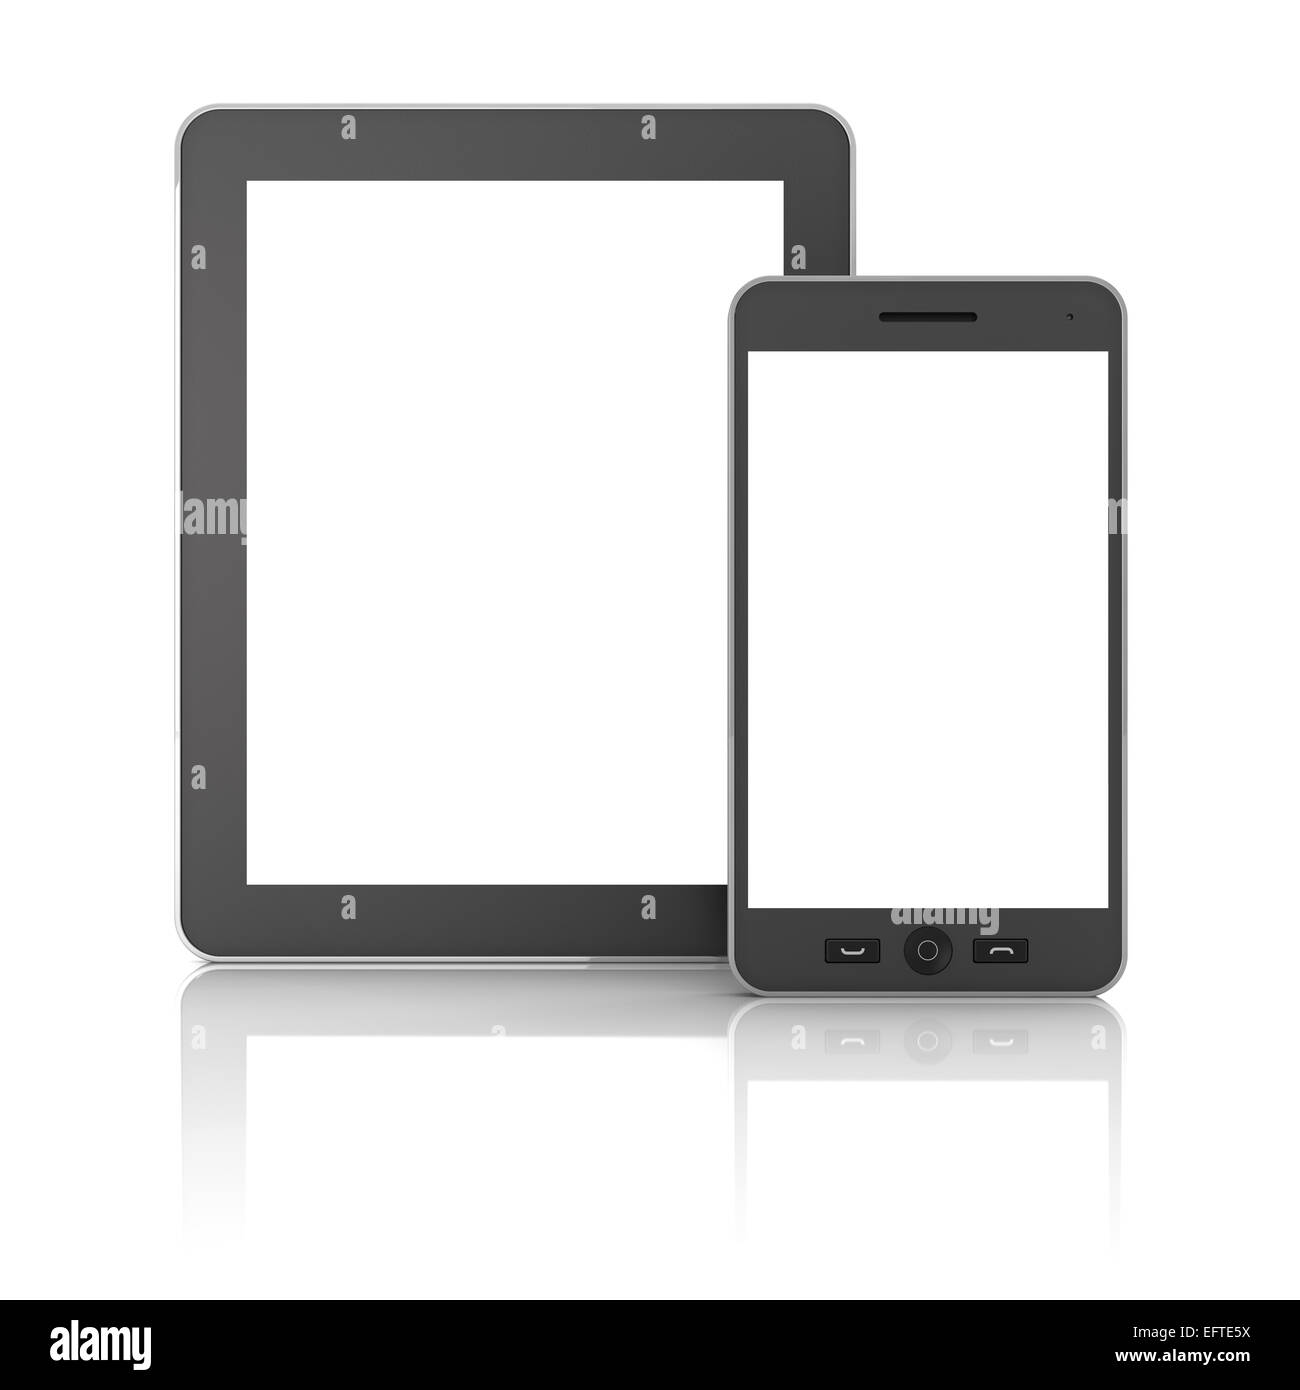 Generic digital tablet and smartphone against white background Stock Photo